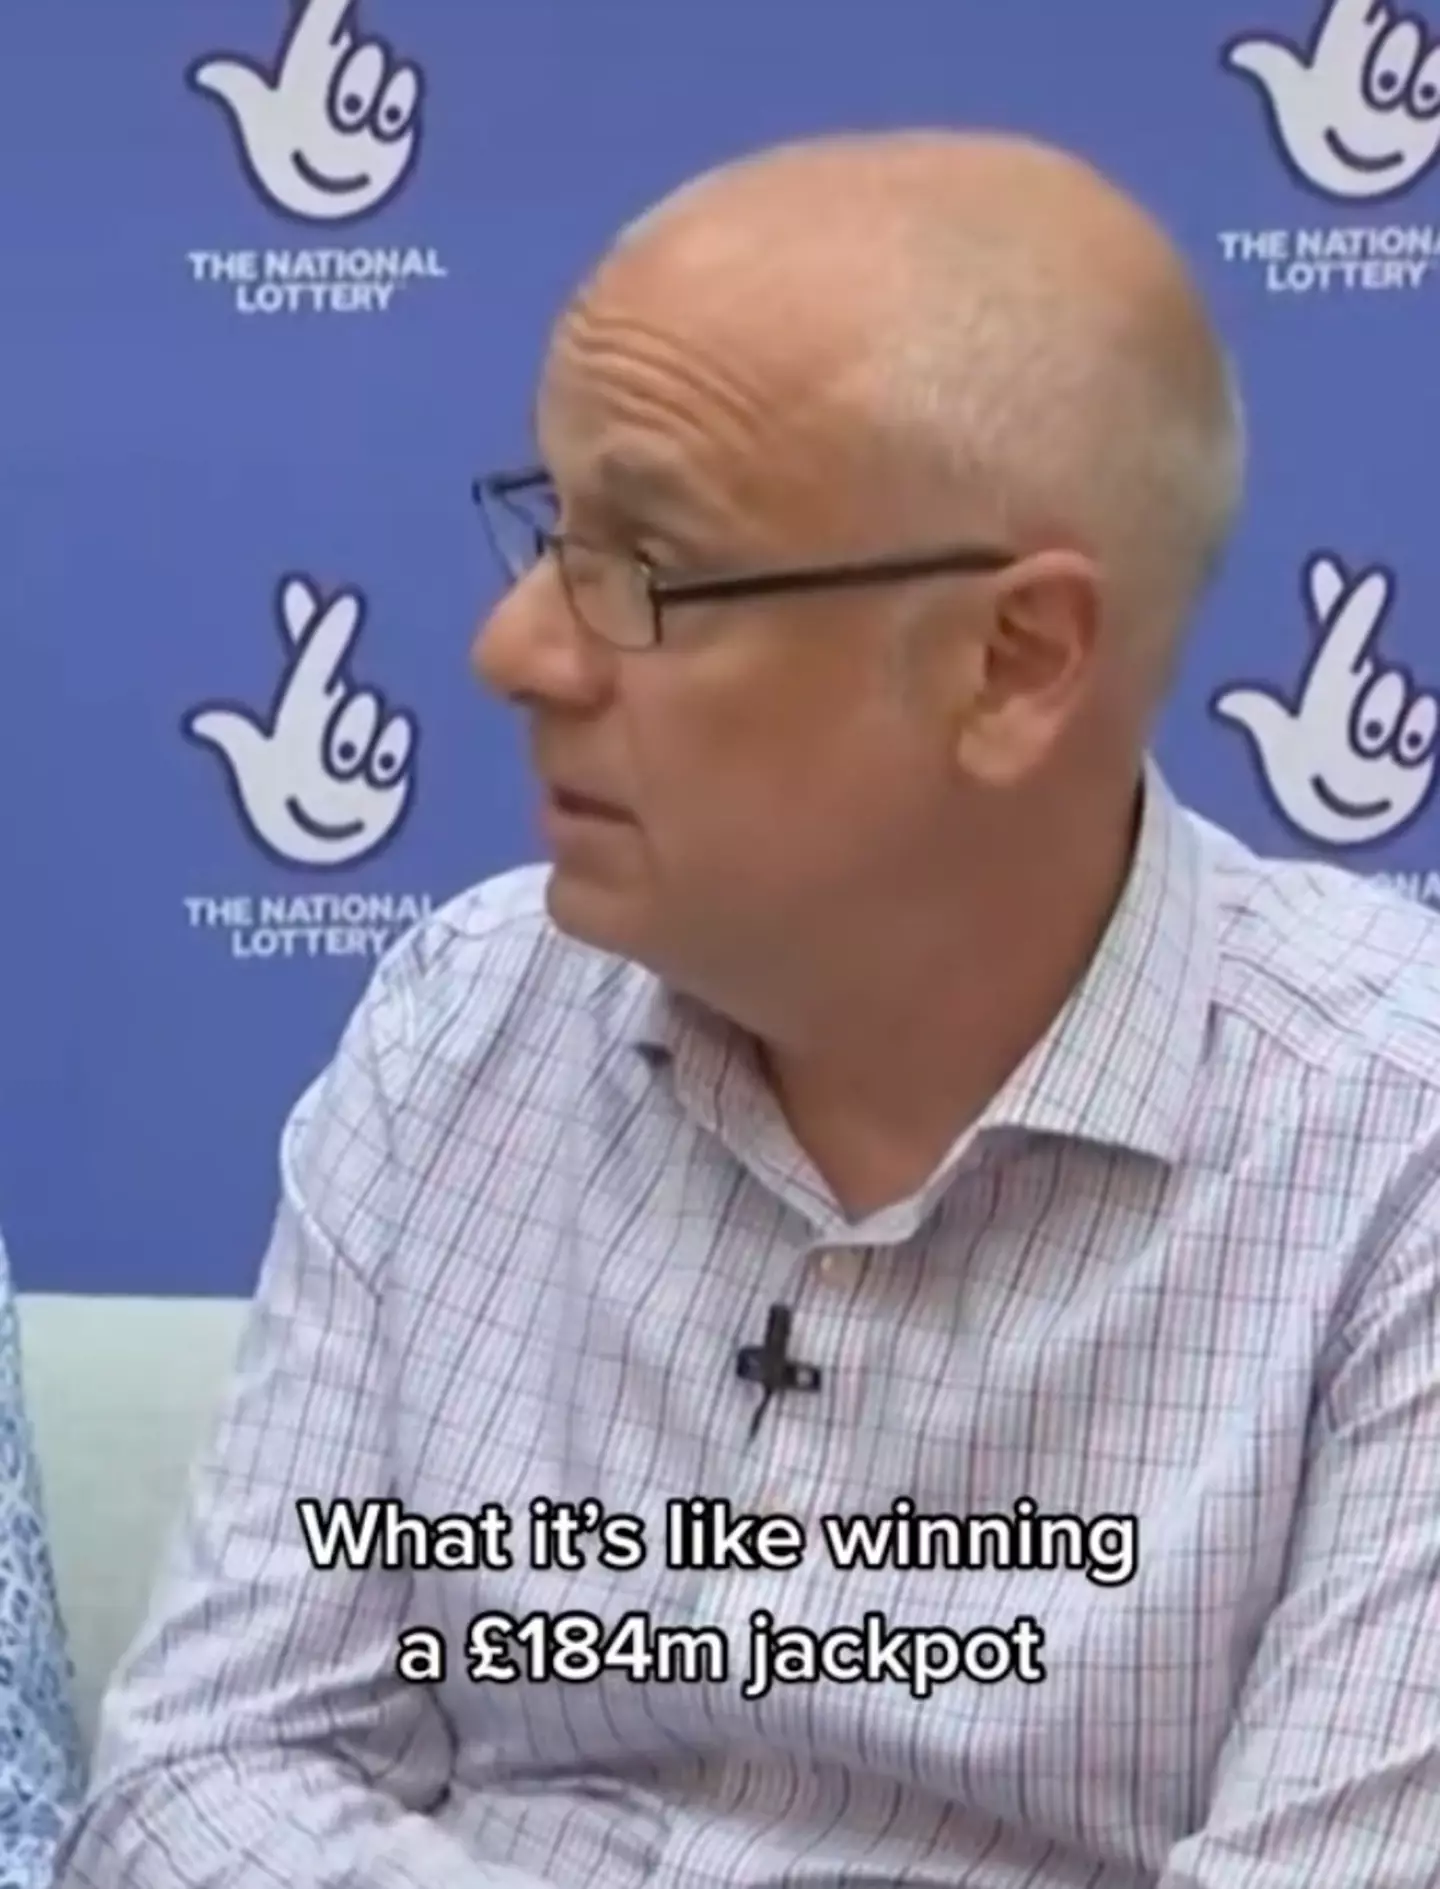 Joe was understandably shocked when he realised how much they'd won.